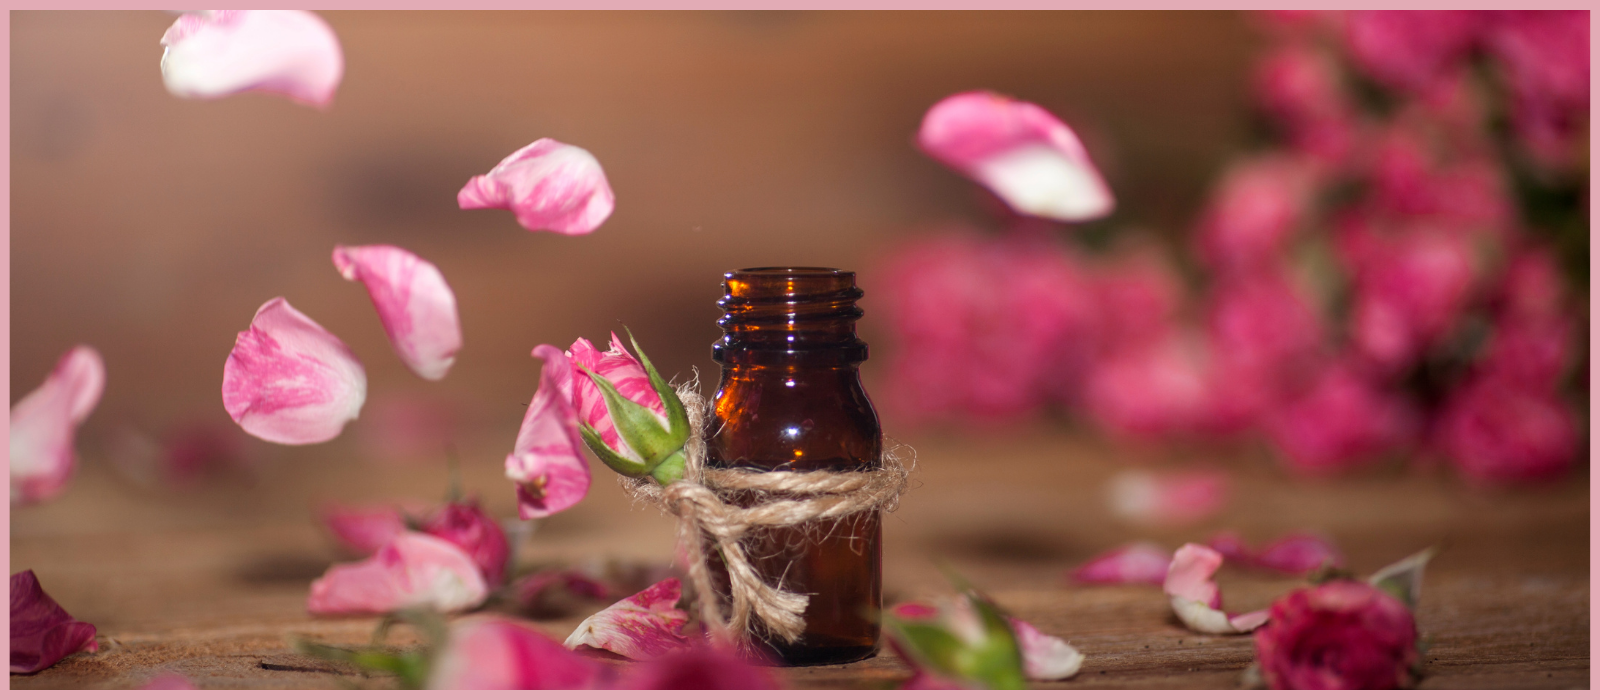 Soap Making: Essential Oils or Fragrance Oils? — The Essential Oil